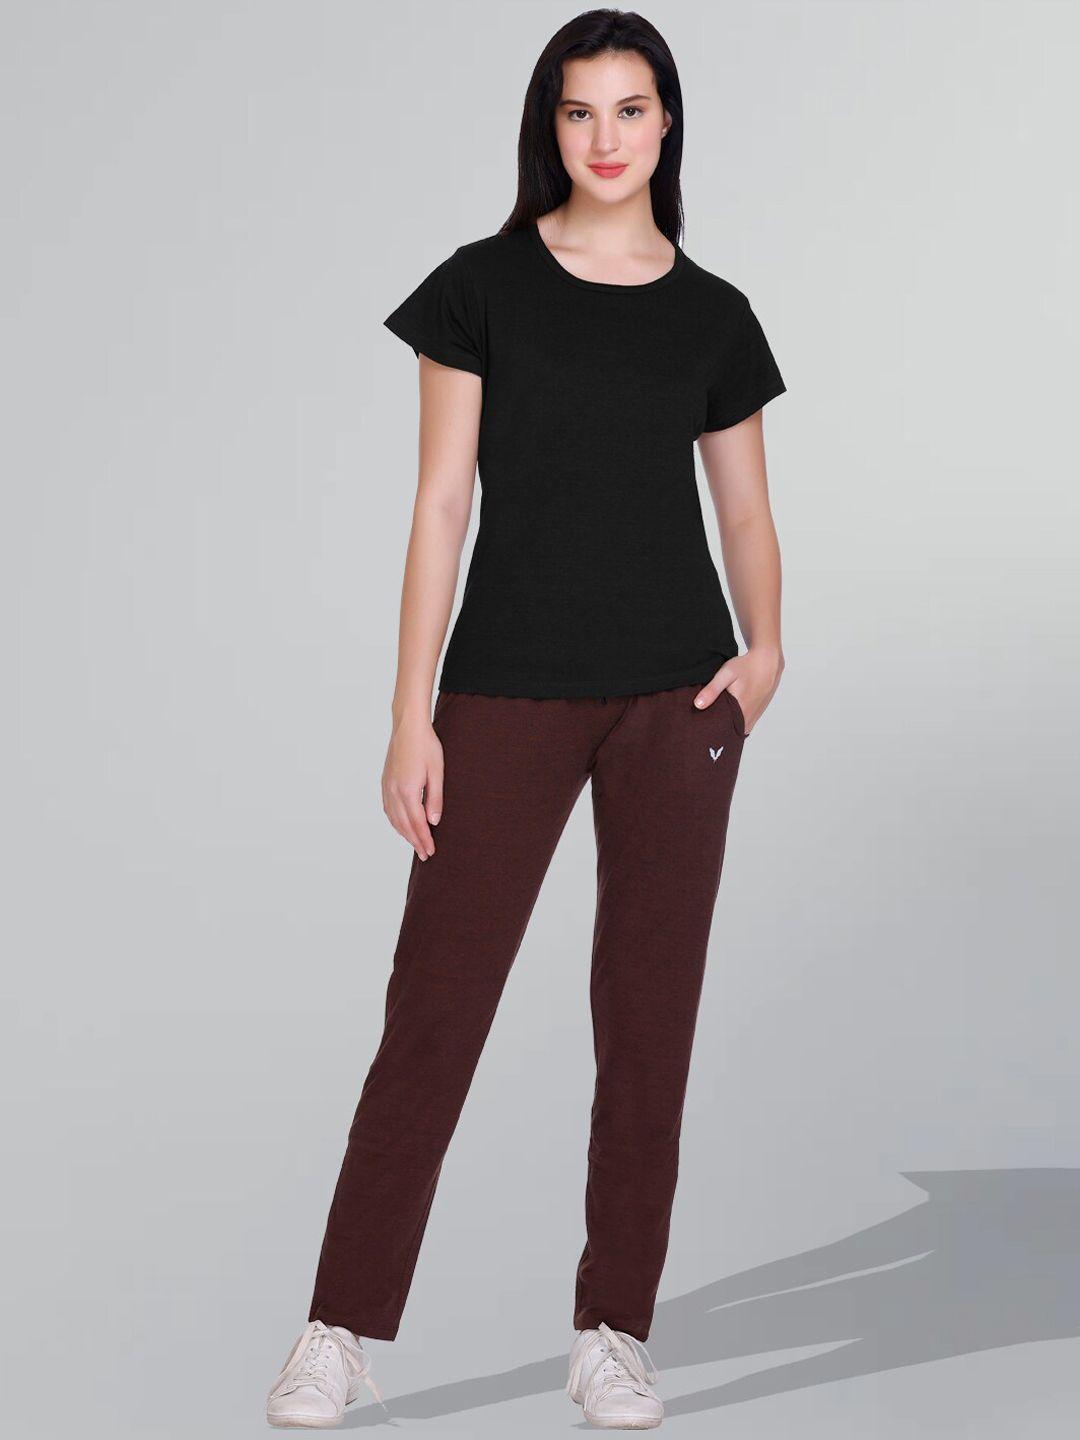 godfrey round neck cotton t-shirt with trousers